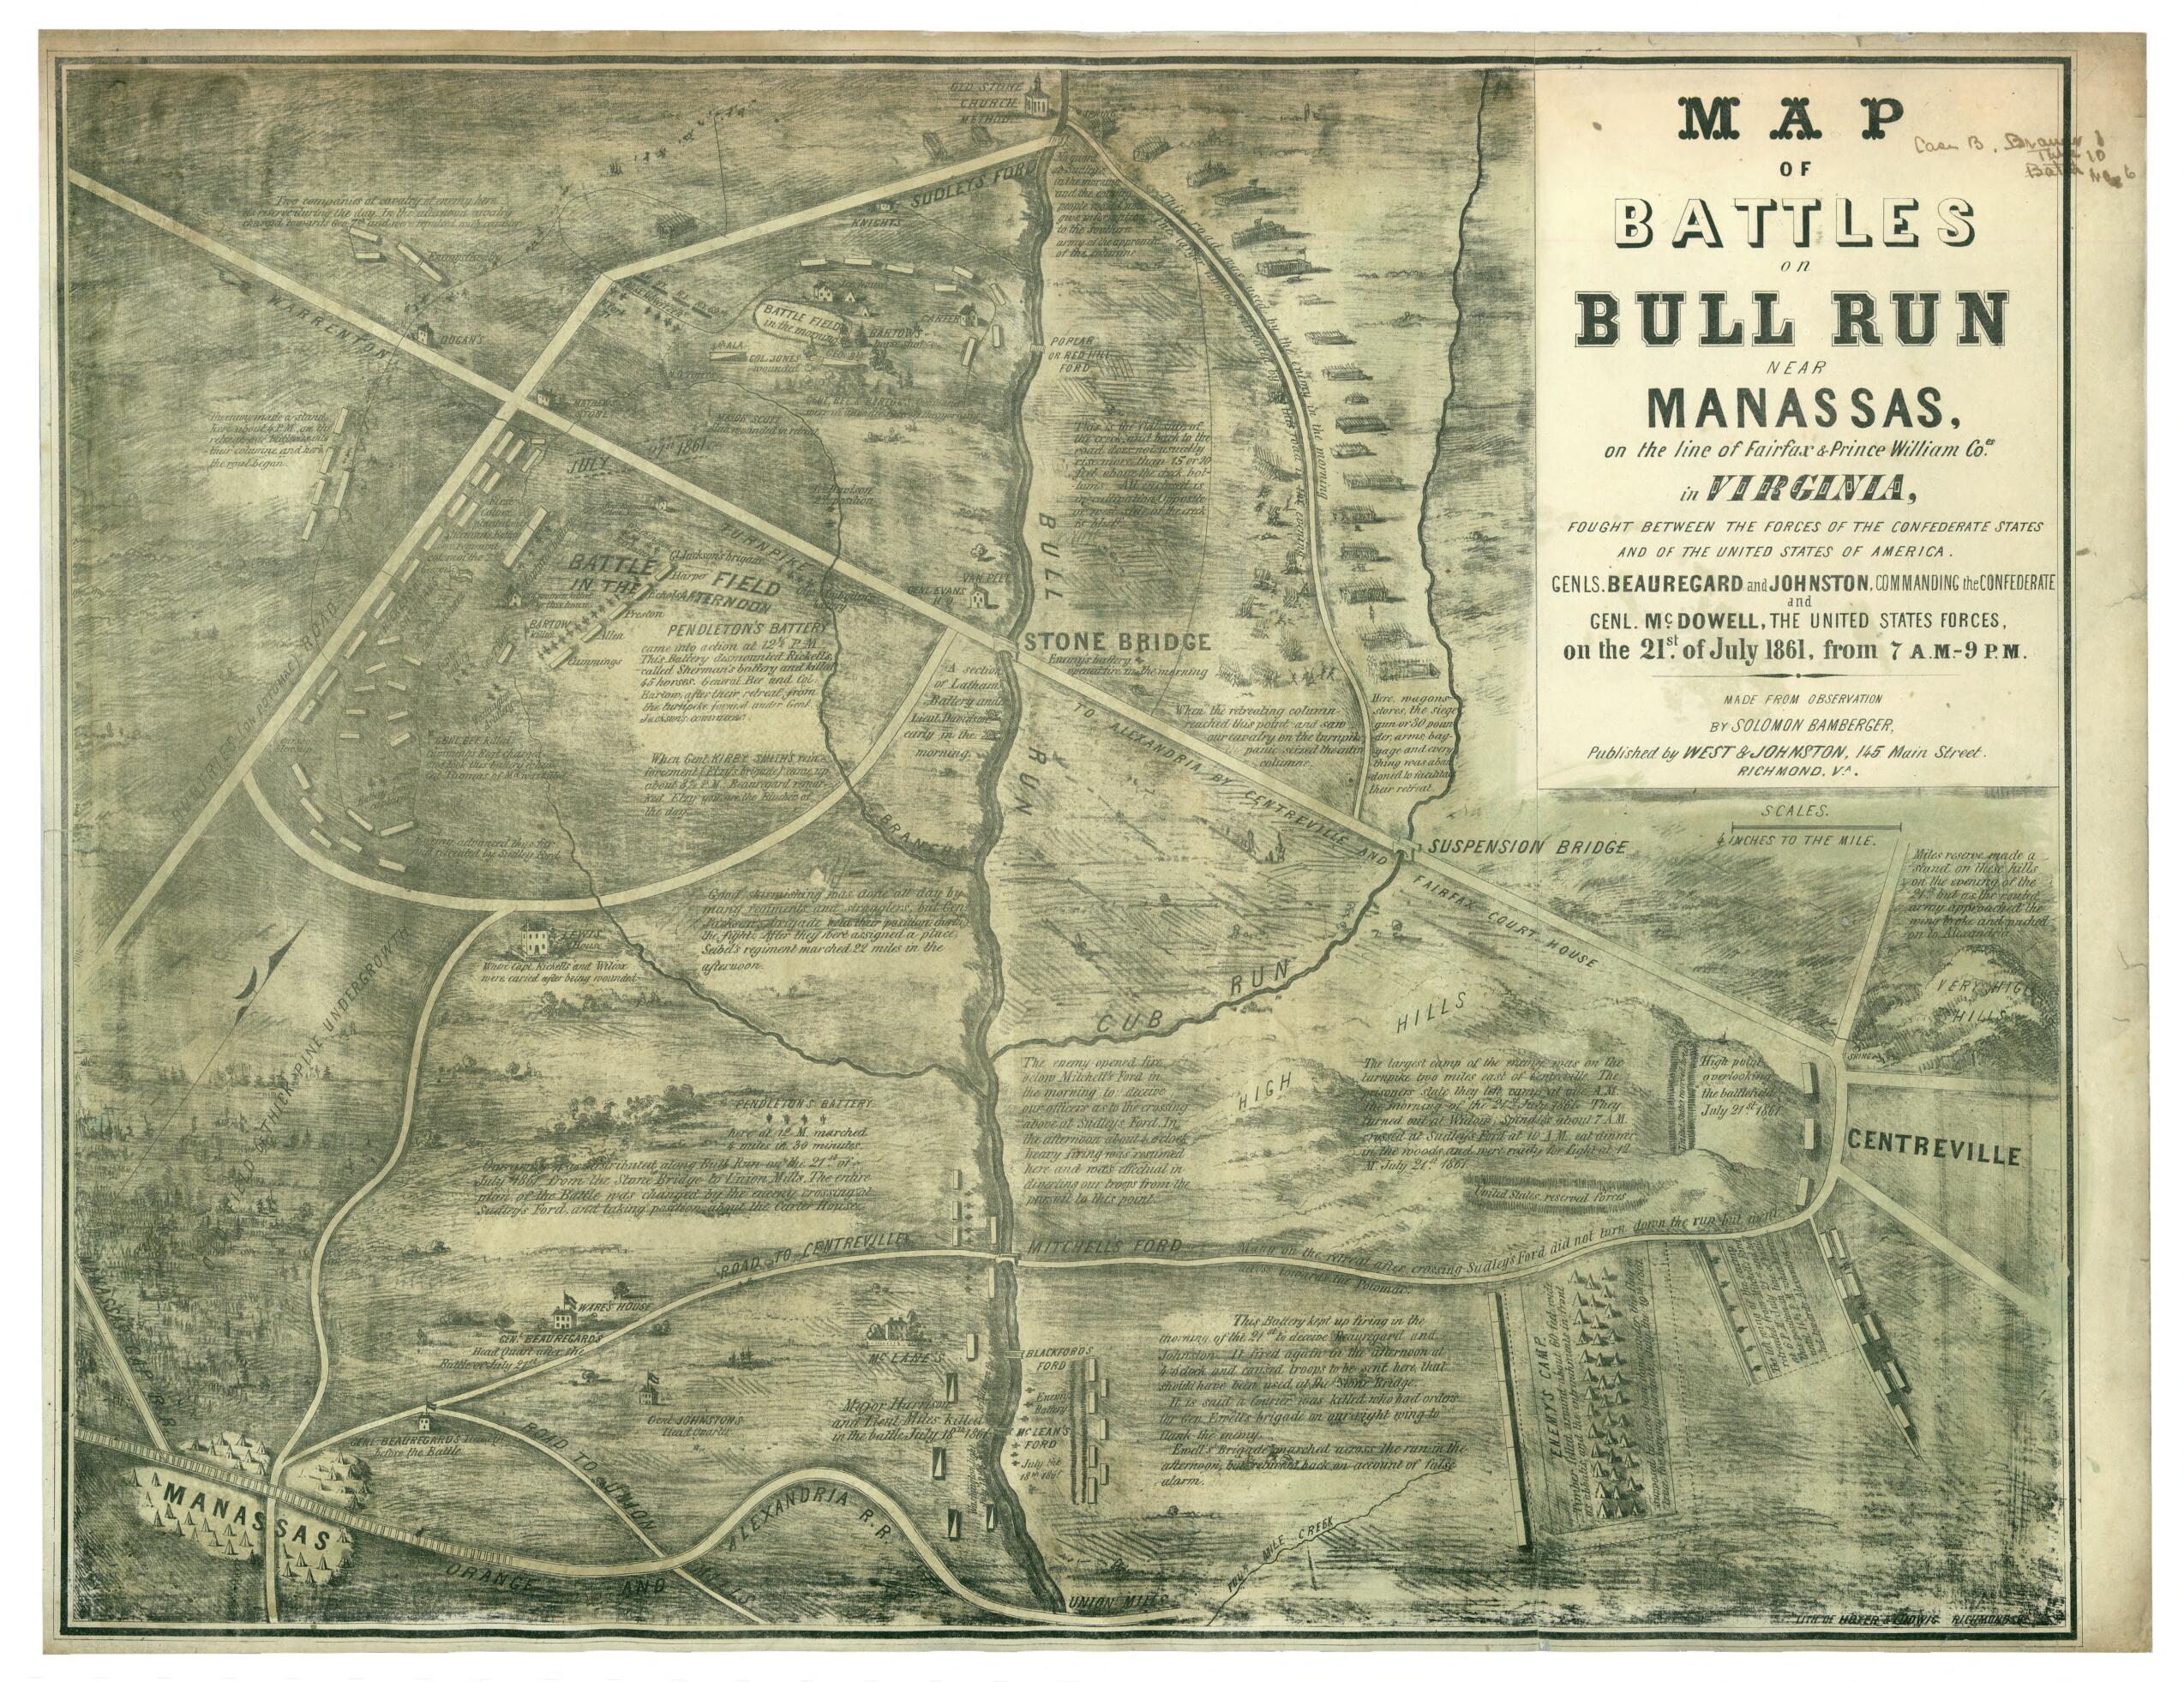 This old map of Map of Battles On Bull Run Near Manassas, 21st of July from 1861 On the Line of Fairfax &amp; Prince William Counties In Virginia, Fought Between the Forces of the Confederate States and of the United States of America was created by Solomon 